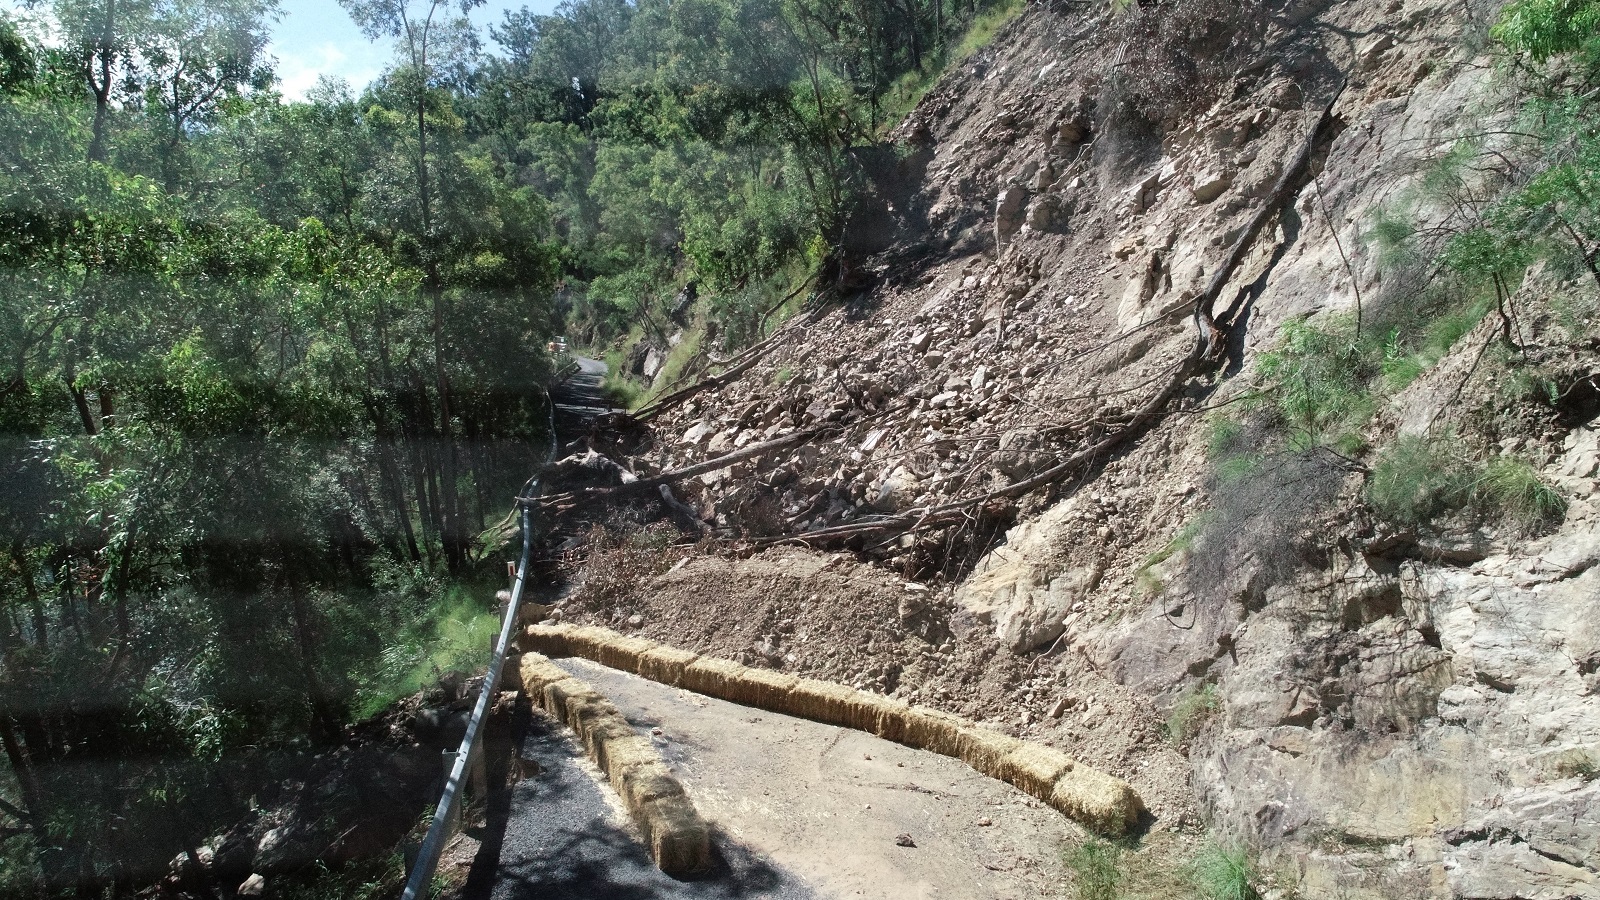 Fallen rock and soil debris cover the road right up to the guard rail in a mountainous forest